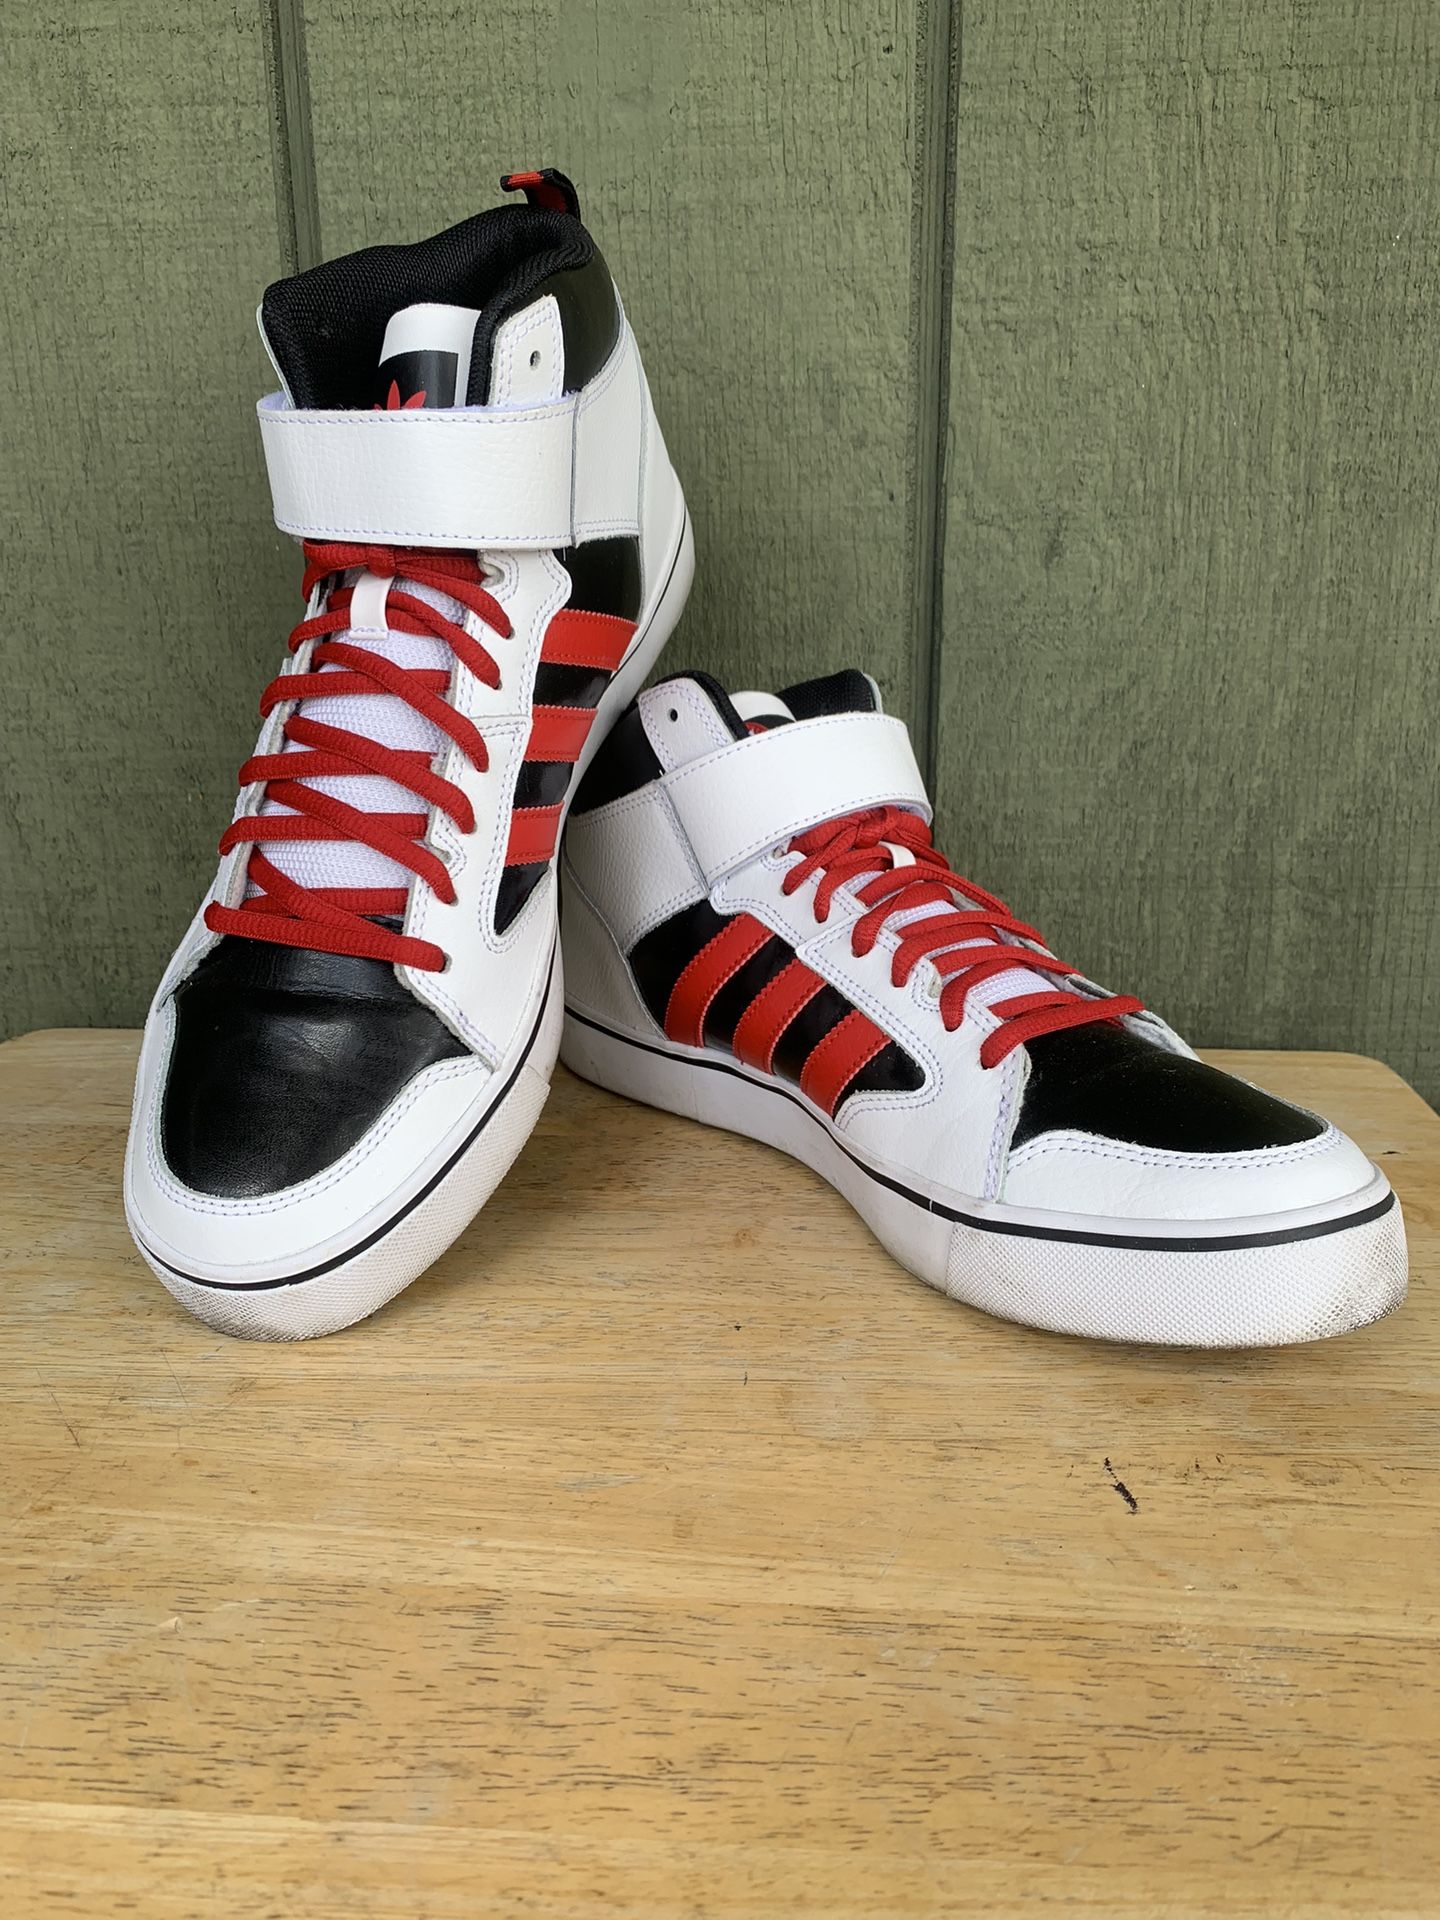 Andes steno Academie Rare Men's Size 9.5 Adidas Varial II Mid White/Black/Red Lace Up Athletic  Shoes for Sale in West Covina, CA - OfferUp